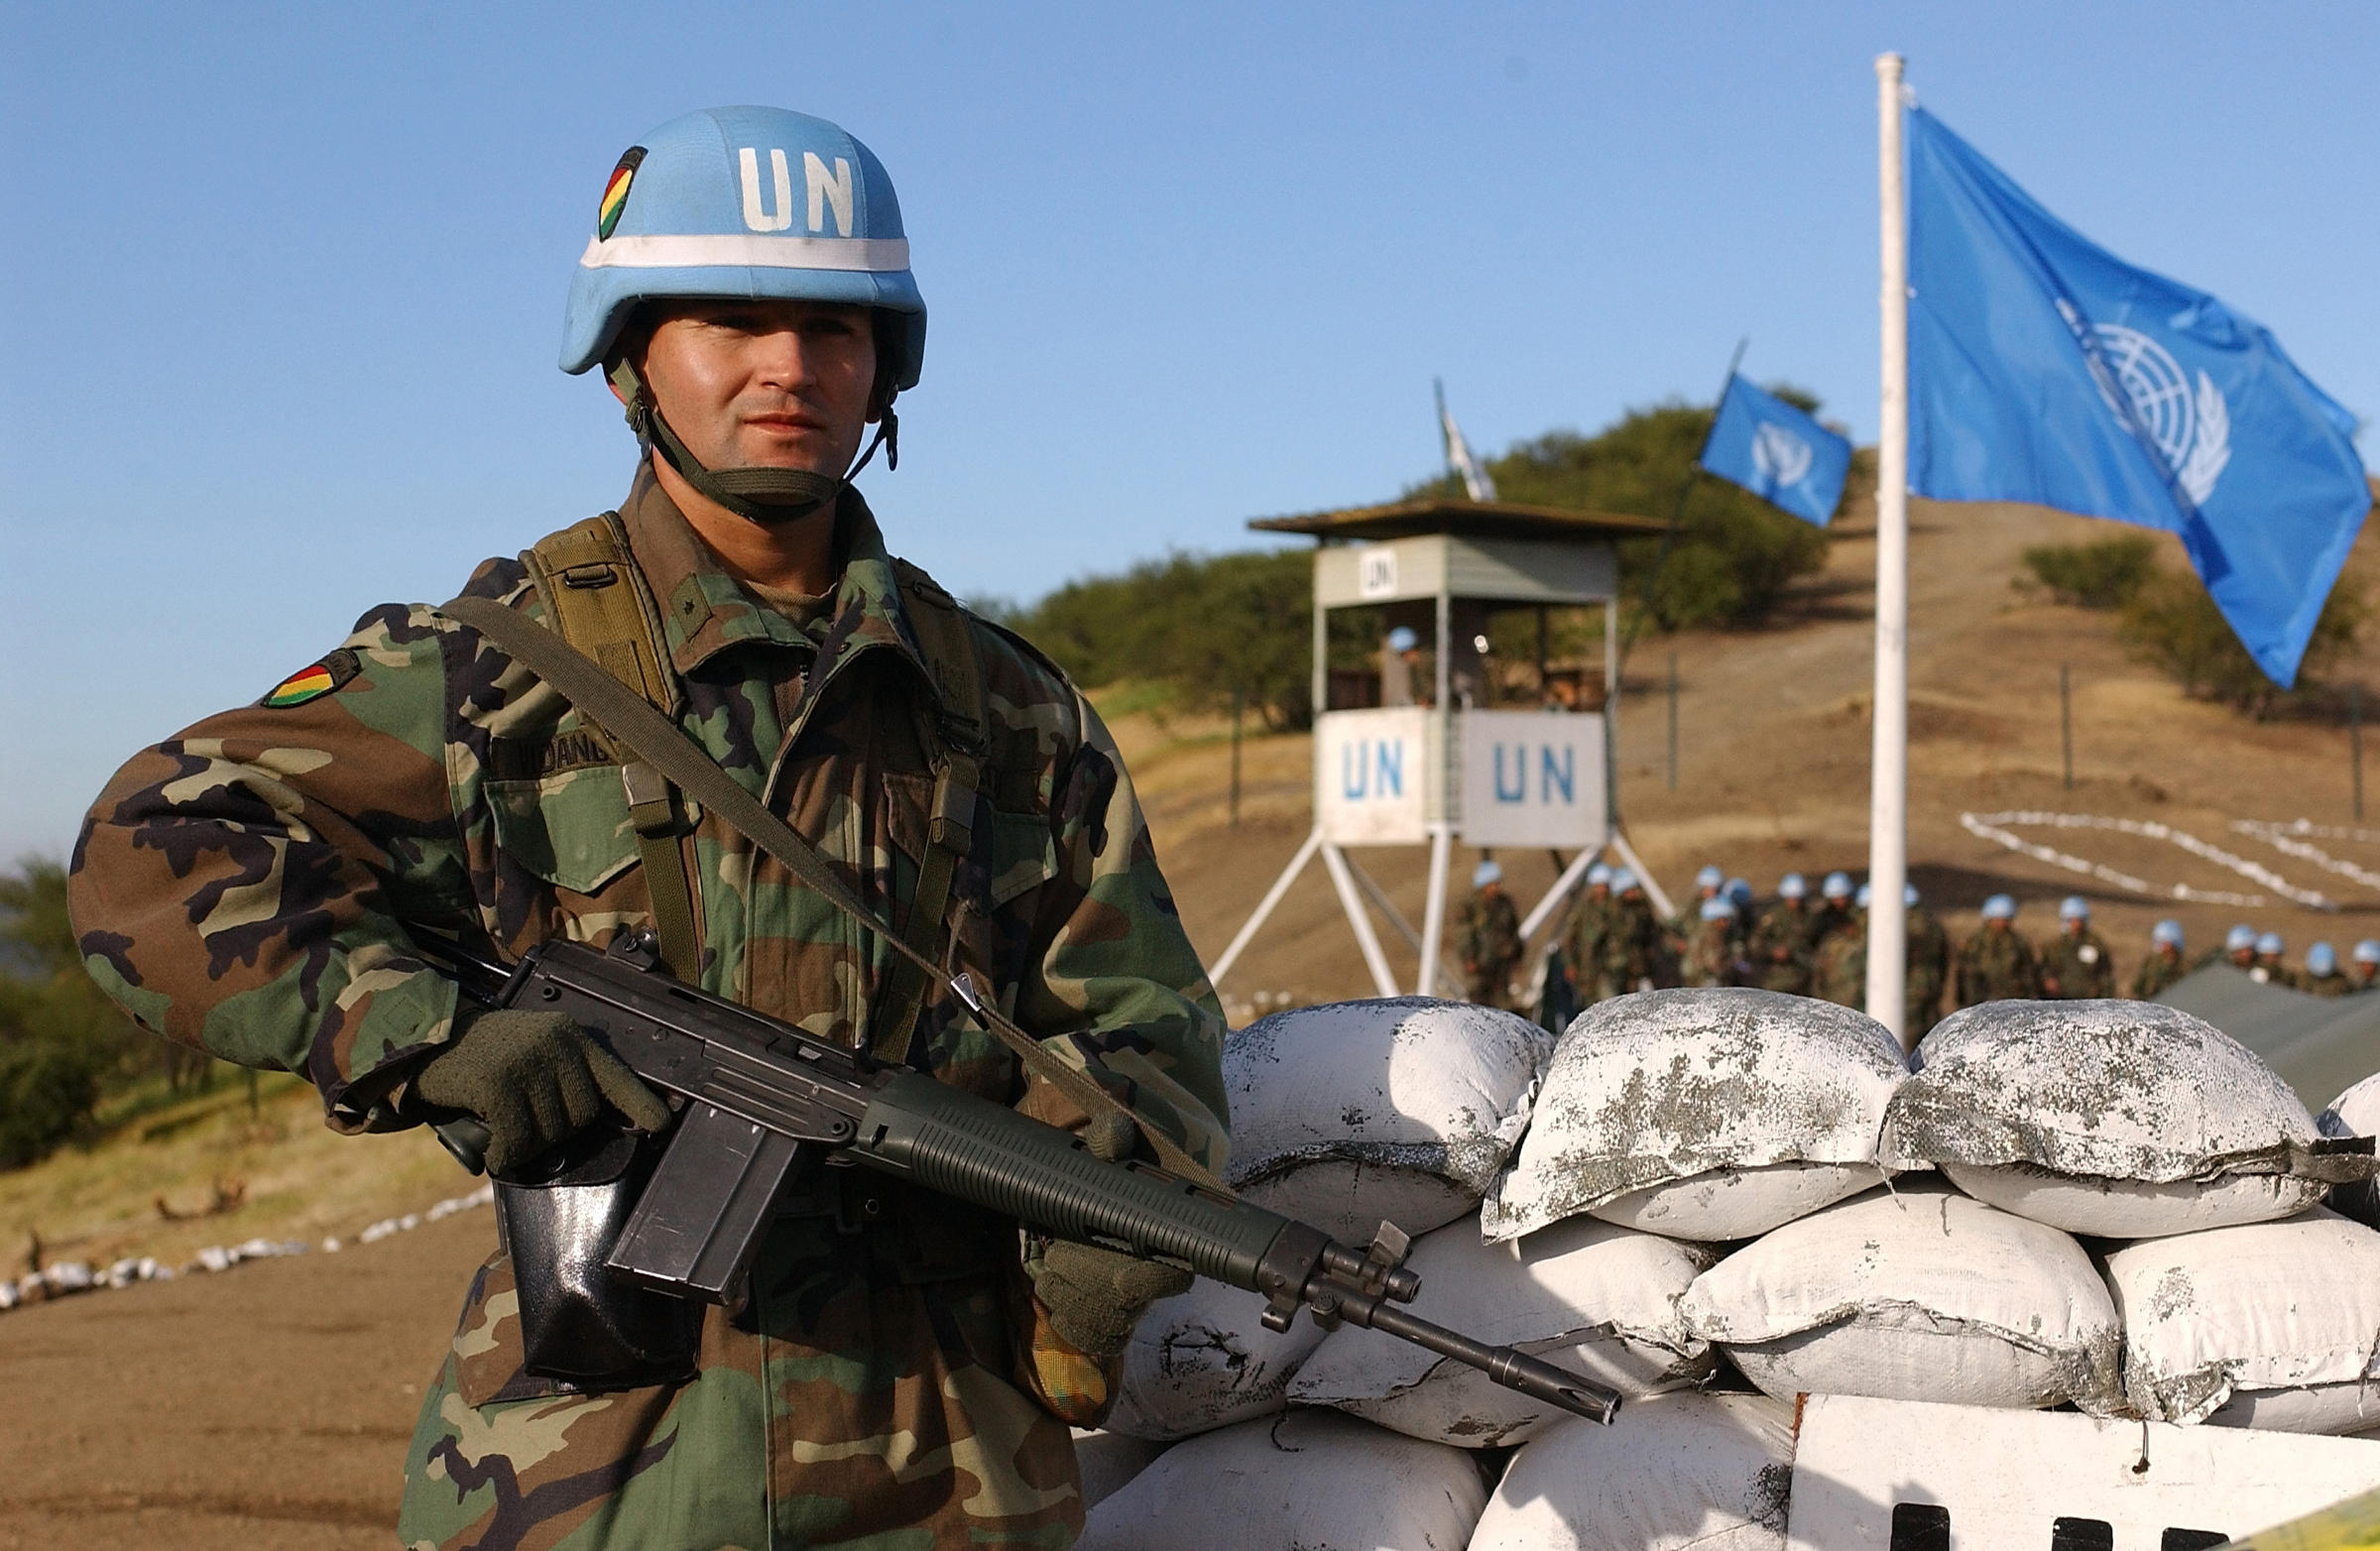 Asia Minute: U.N. Peacekeepers See More Personnel and Funding from Asia